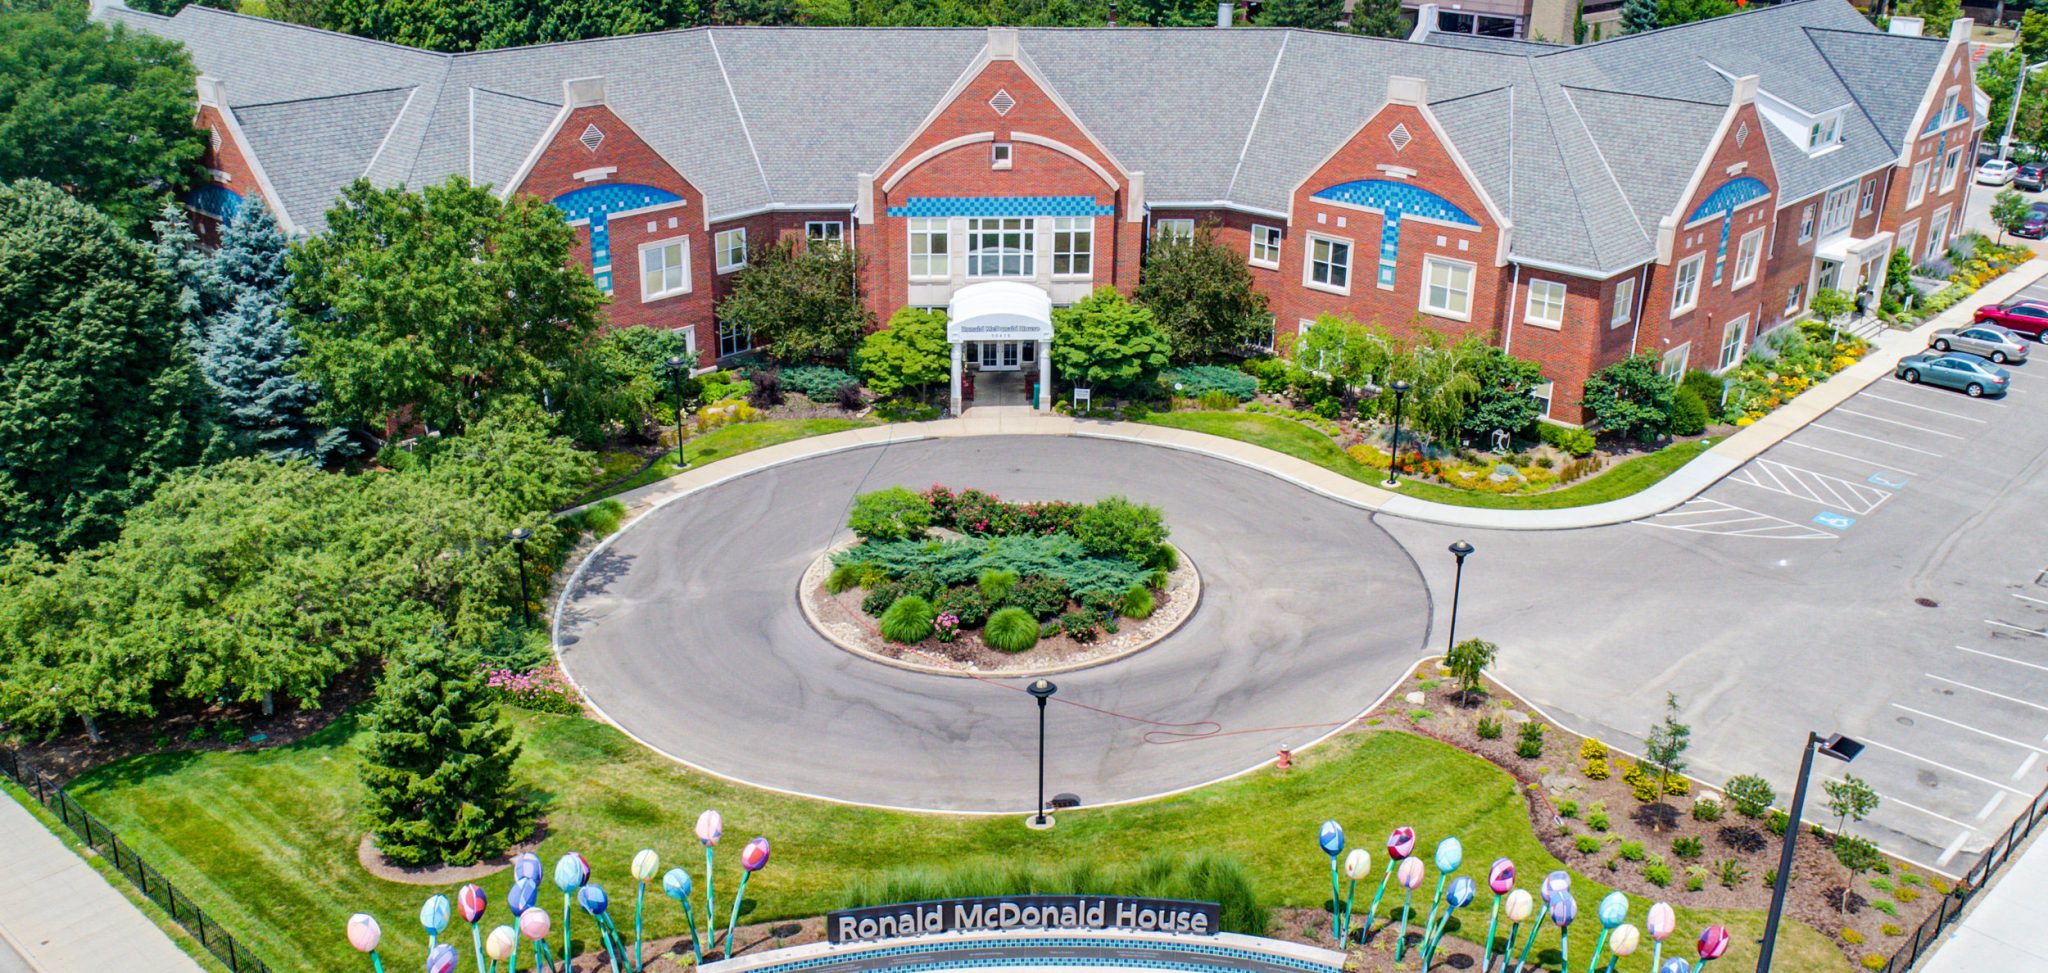 The Cleveland Ronald McDonald House, shown from an overhead view. It is a brow brick building with 4 floors, surrounded by attractive landscaping.